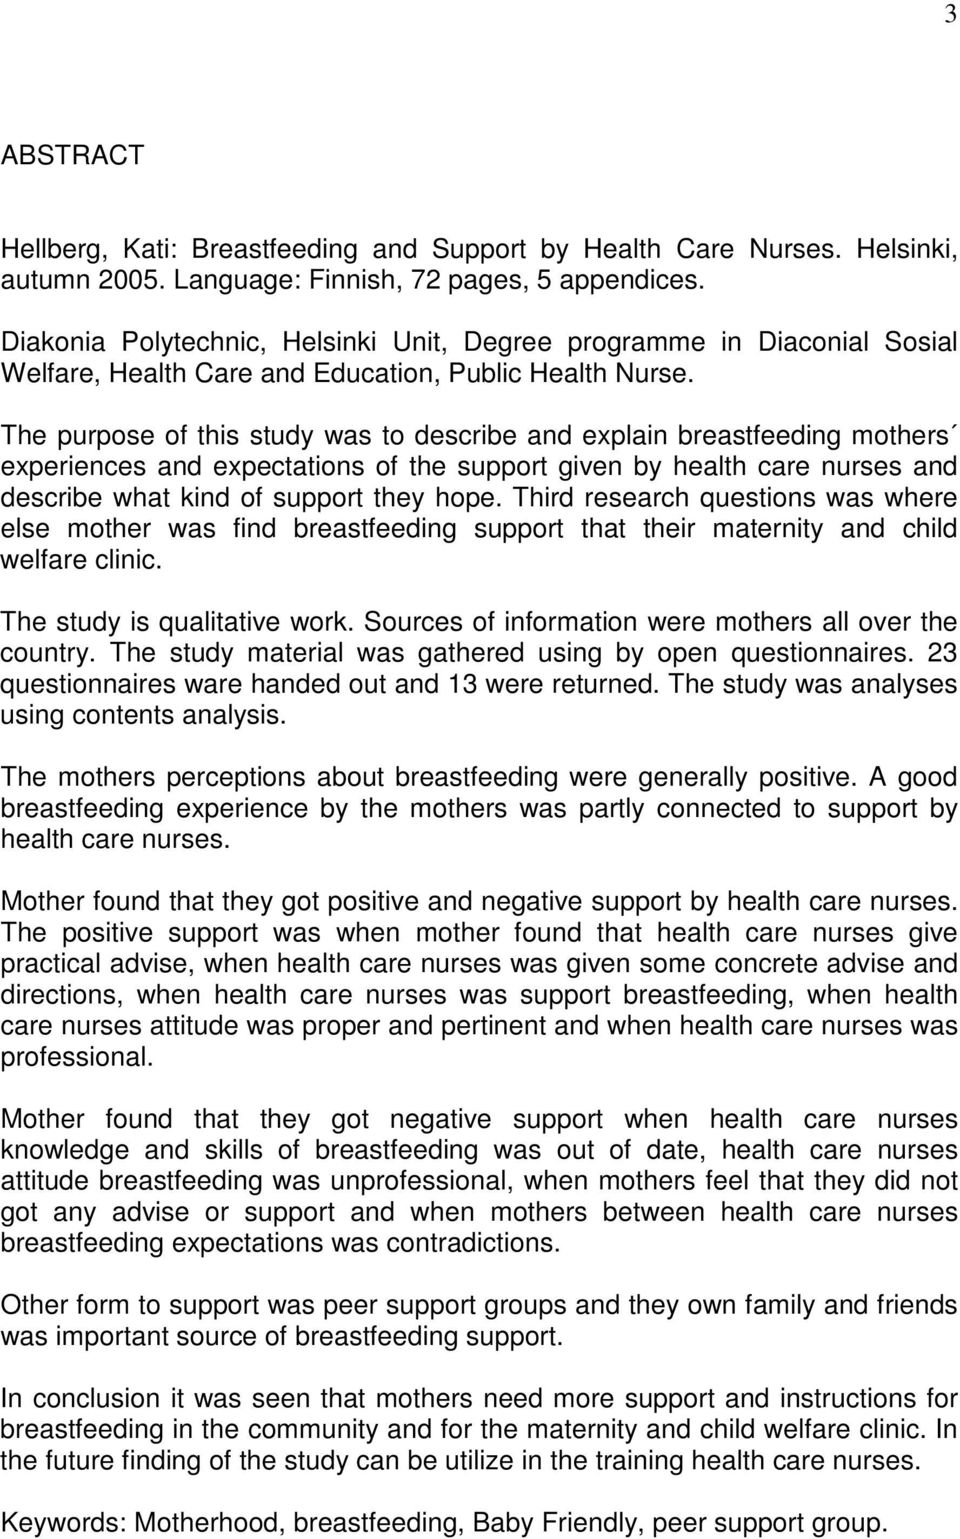 The purpose of this study was to describe and explain breastfeeding mothers experiences and expectations of the support given by health care nurses and describe what kind of support they hope.